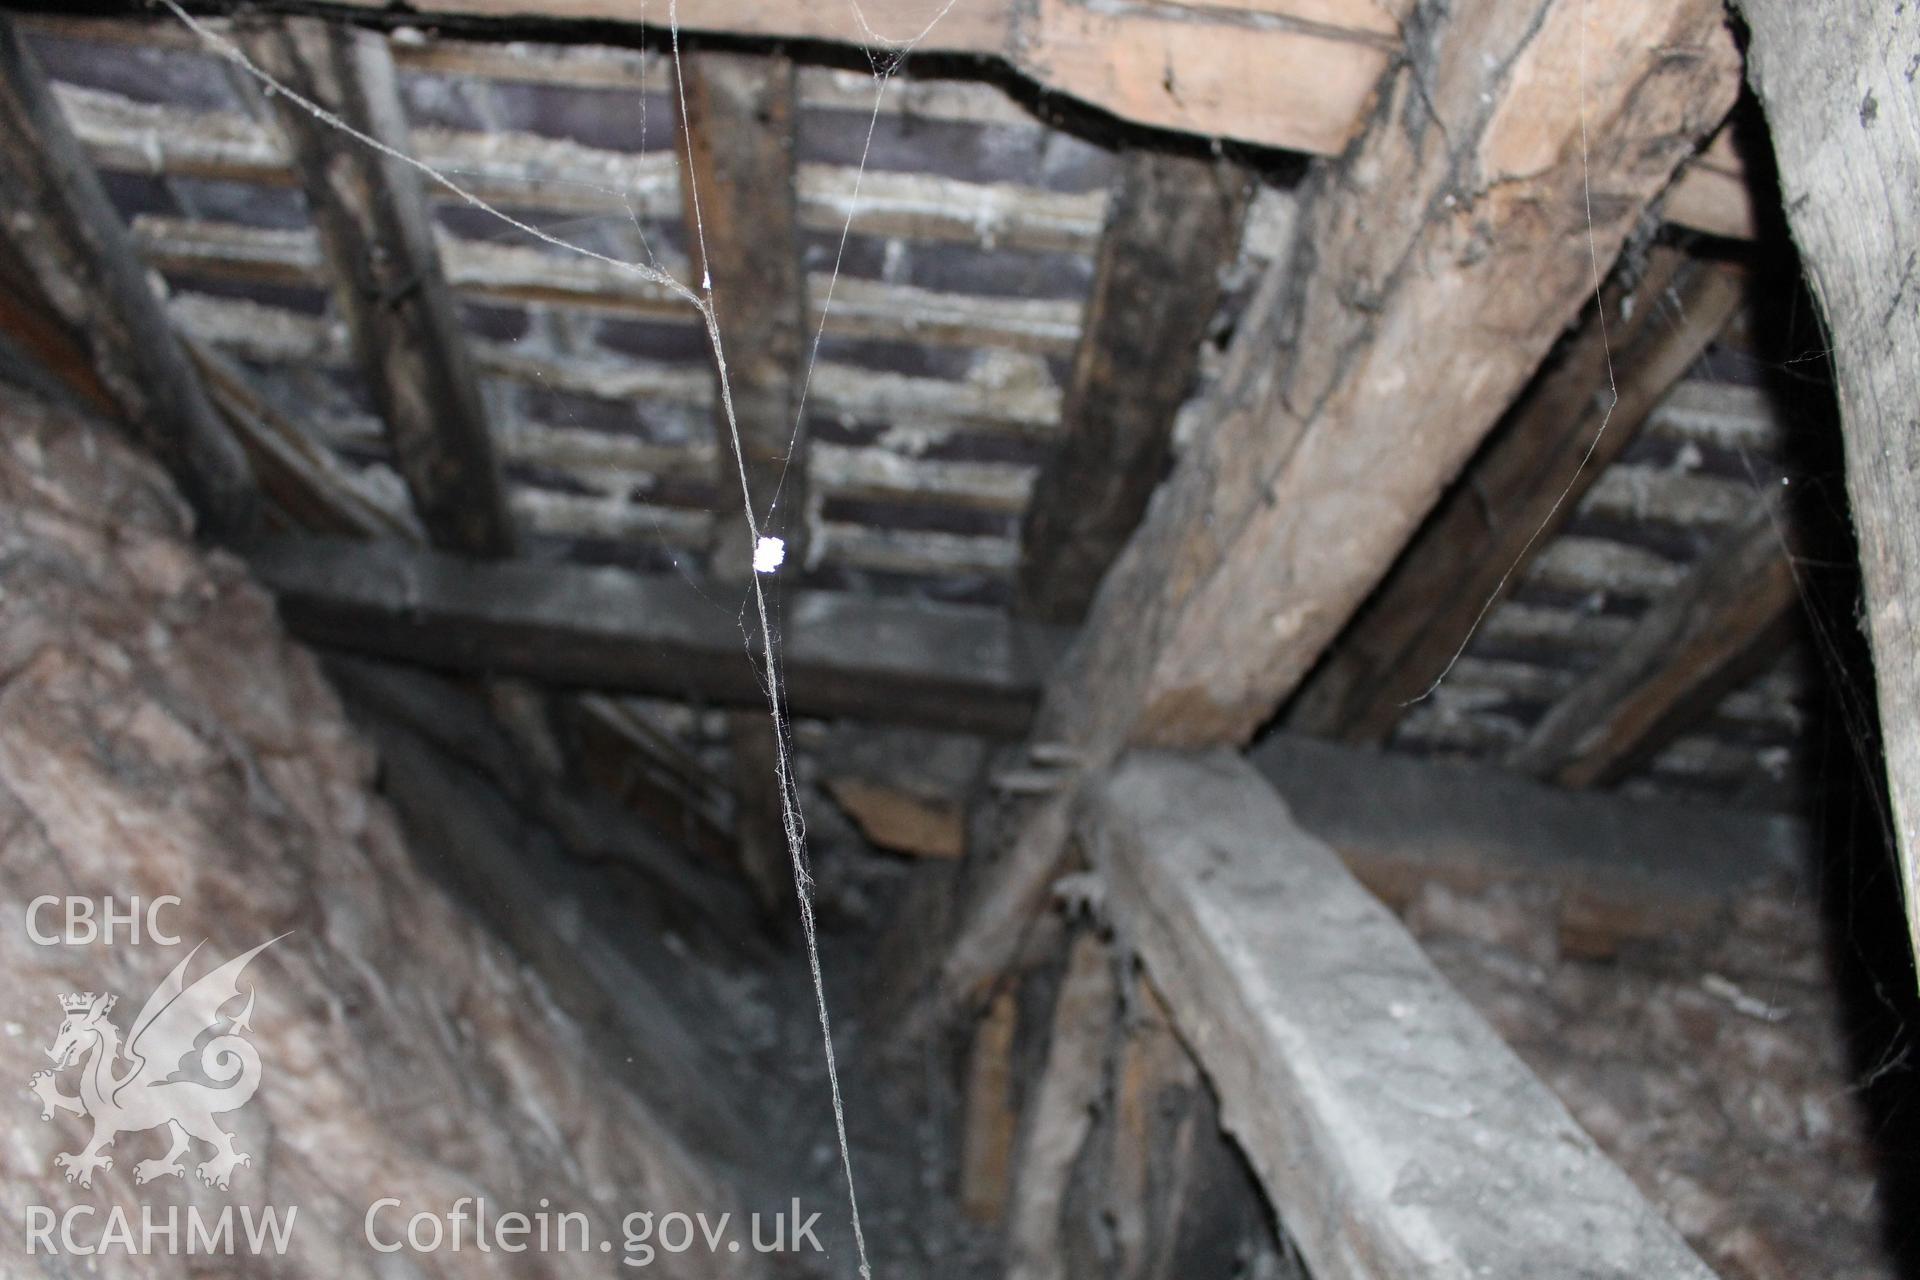 Colour photograph showing detail of insulating wool and timber roof frame at 5-7 Mwrog Street, Ruthin. Photographed during survey conducted by Geoff Ward on 14th May 2014.